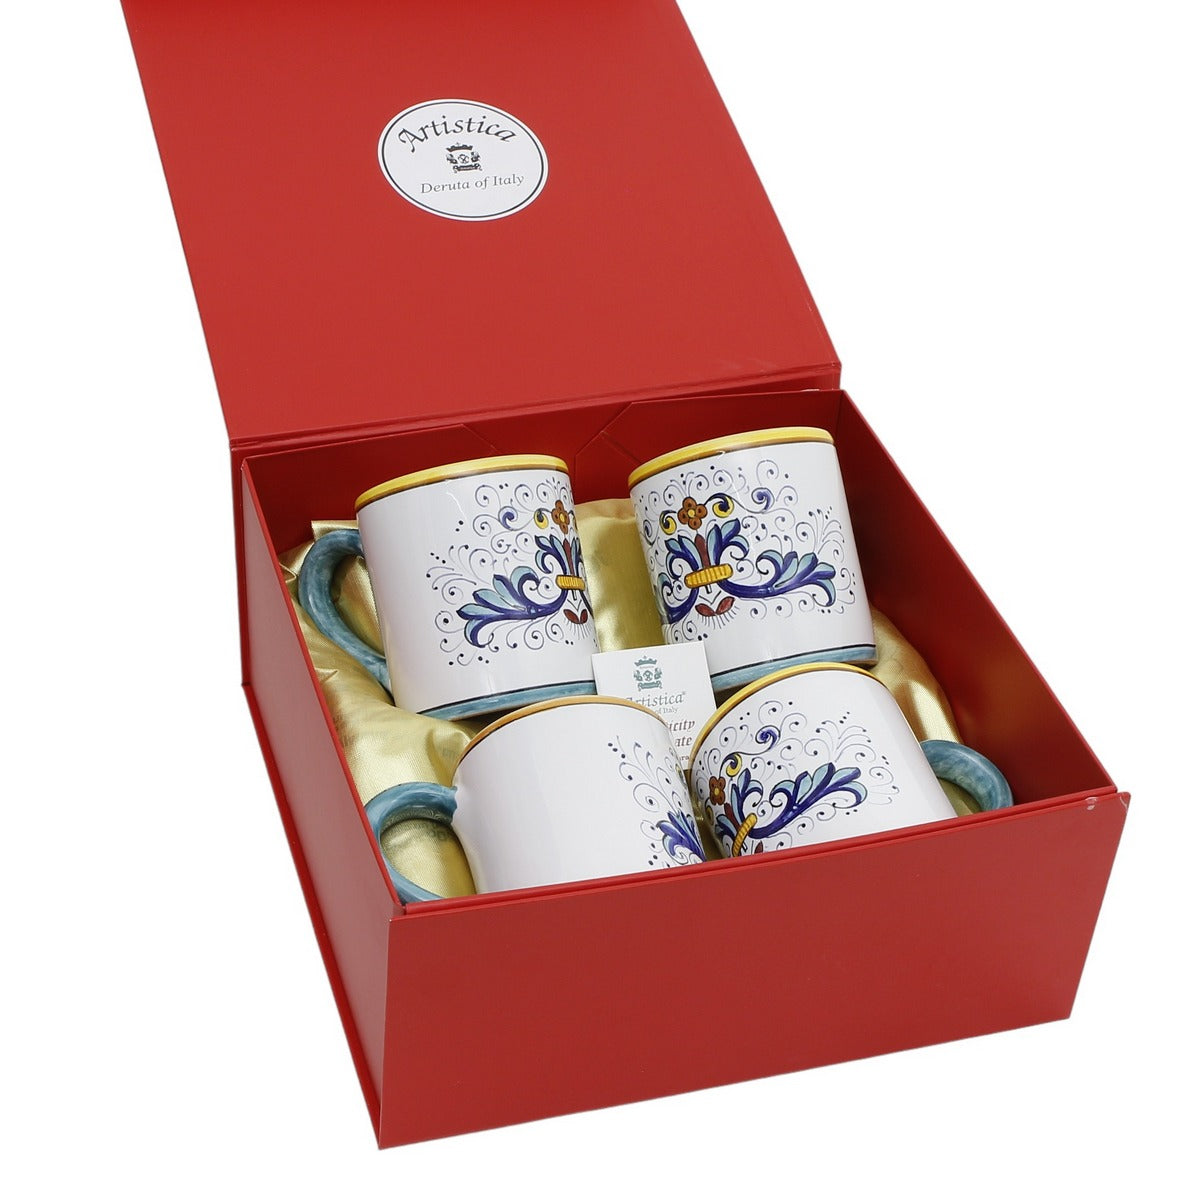 GIFT BOX: DeLuxe Glossy Red Gift Box with Ricco Deruta Lite Mugs 10 Oz. (Set of 4 pcs)